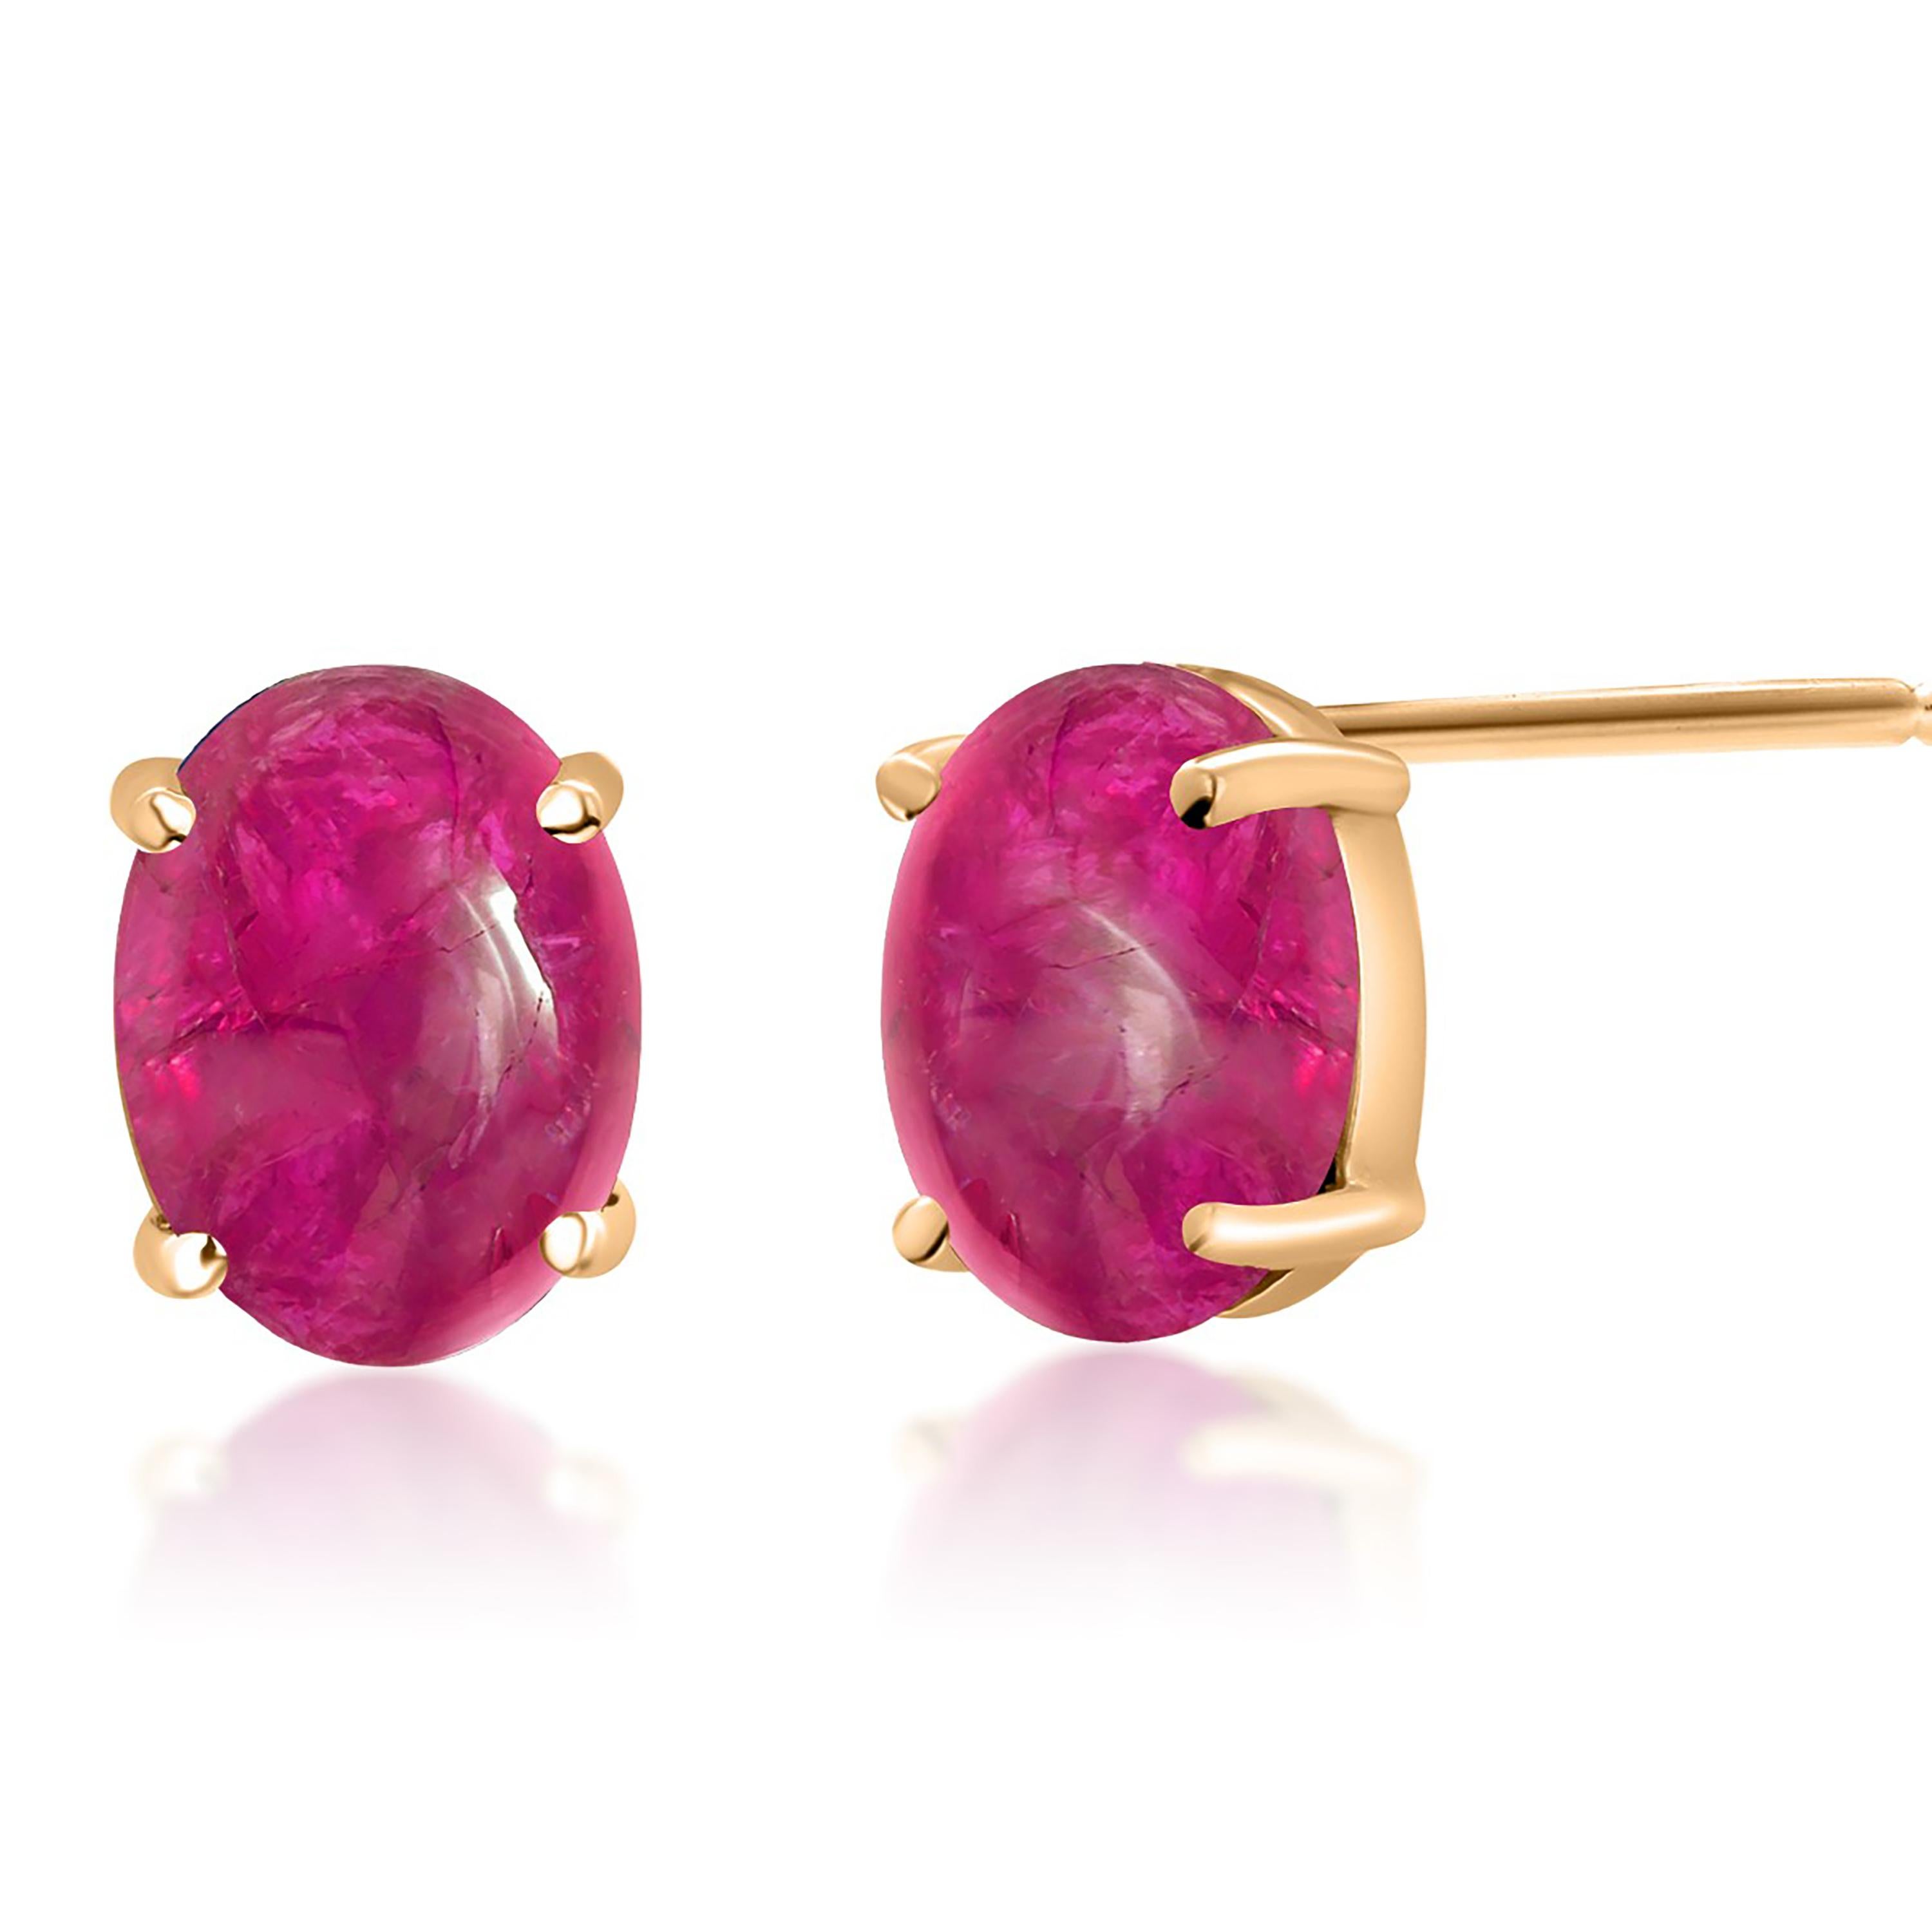 Oval Cut Matched Oval Cabochon Ruby 2.08 Carat Yellow Gold 0.27 x 0.20 Inch Stud Earrings For Sale